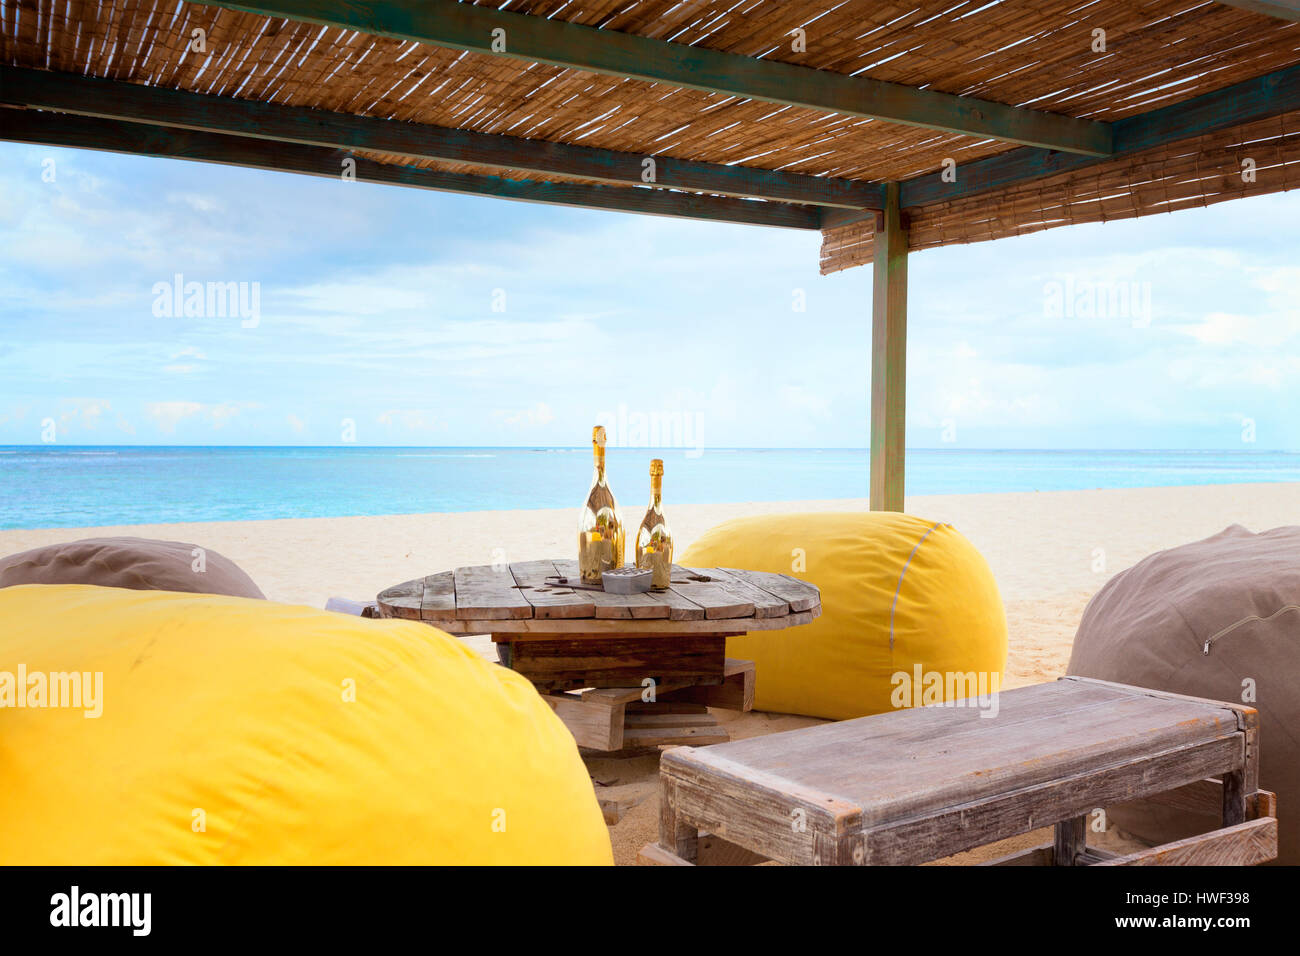 Two bottles of champagne on an old wooden table with pouf seats for romantic  dinner for honeymoon copules on a tropical beach Stock Photo